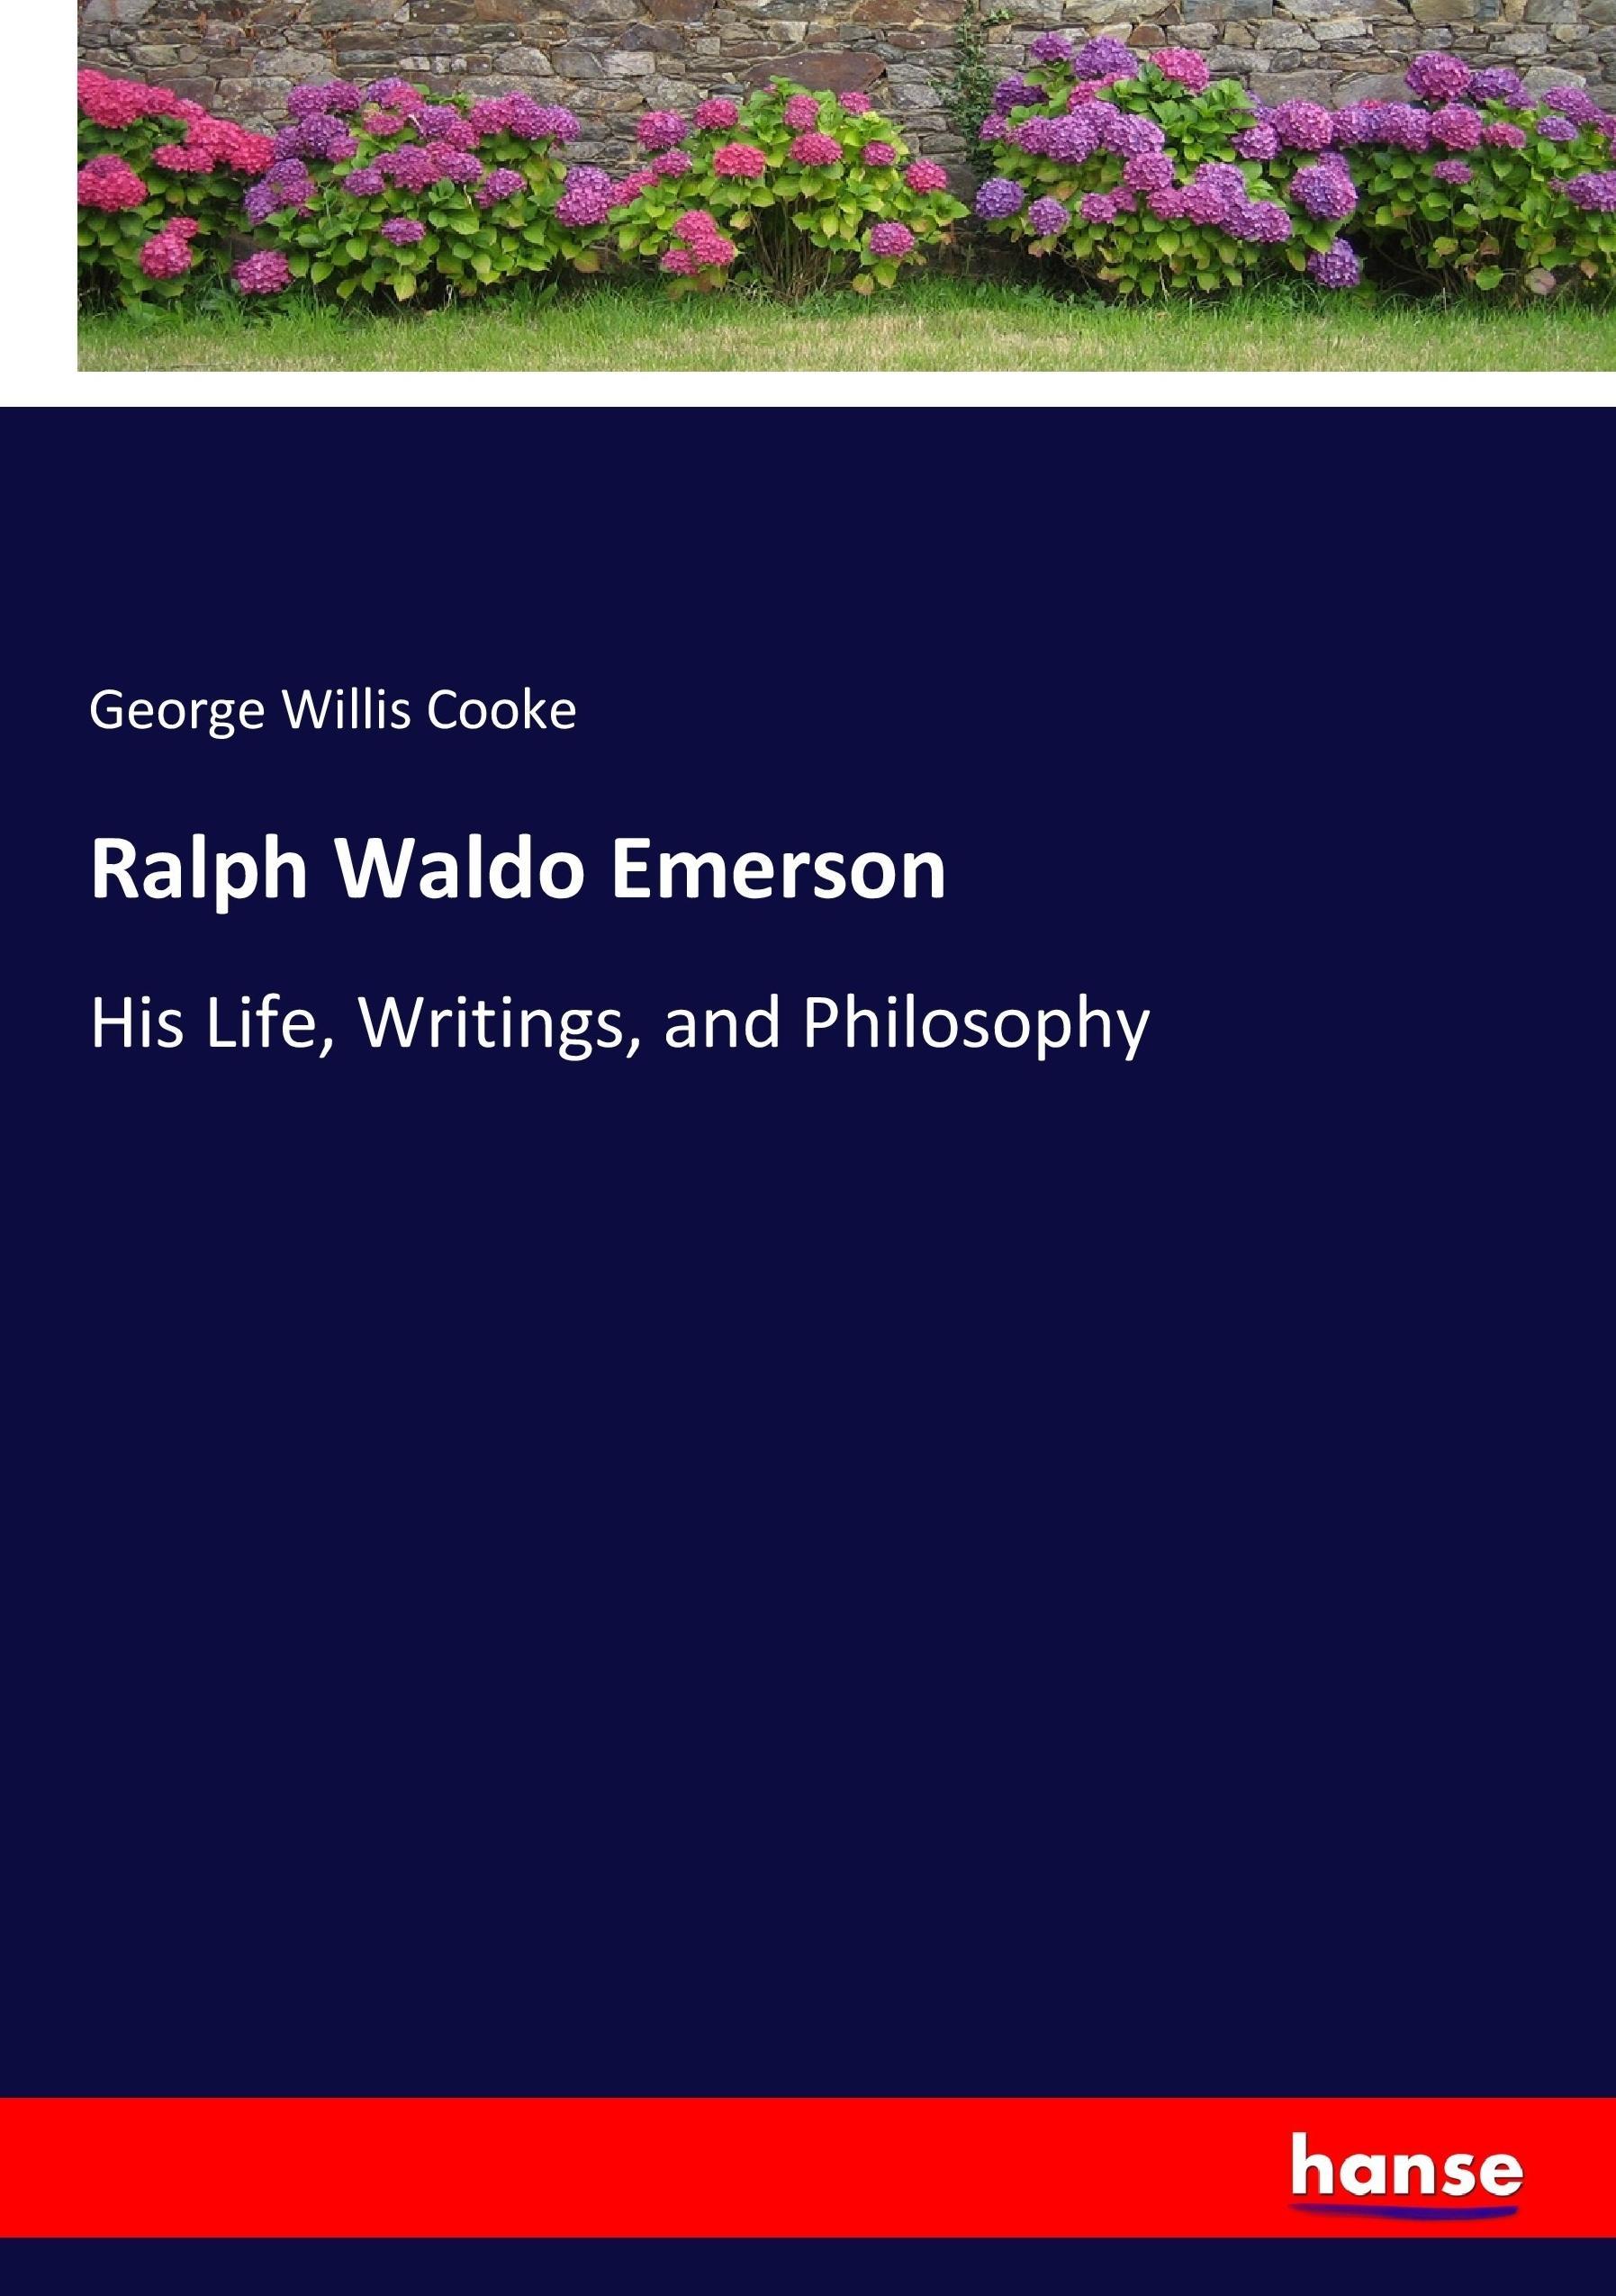 Ralph Waldo Emerson | His Life, Writings, and Philosophy | George Willis Cooke | Taschenbuch | Paperback | 404 S. | Englisch | 2017 | hansebooks | EAN 9783744652452 - Cooke, George Willis